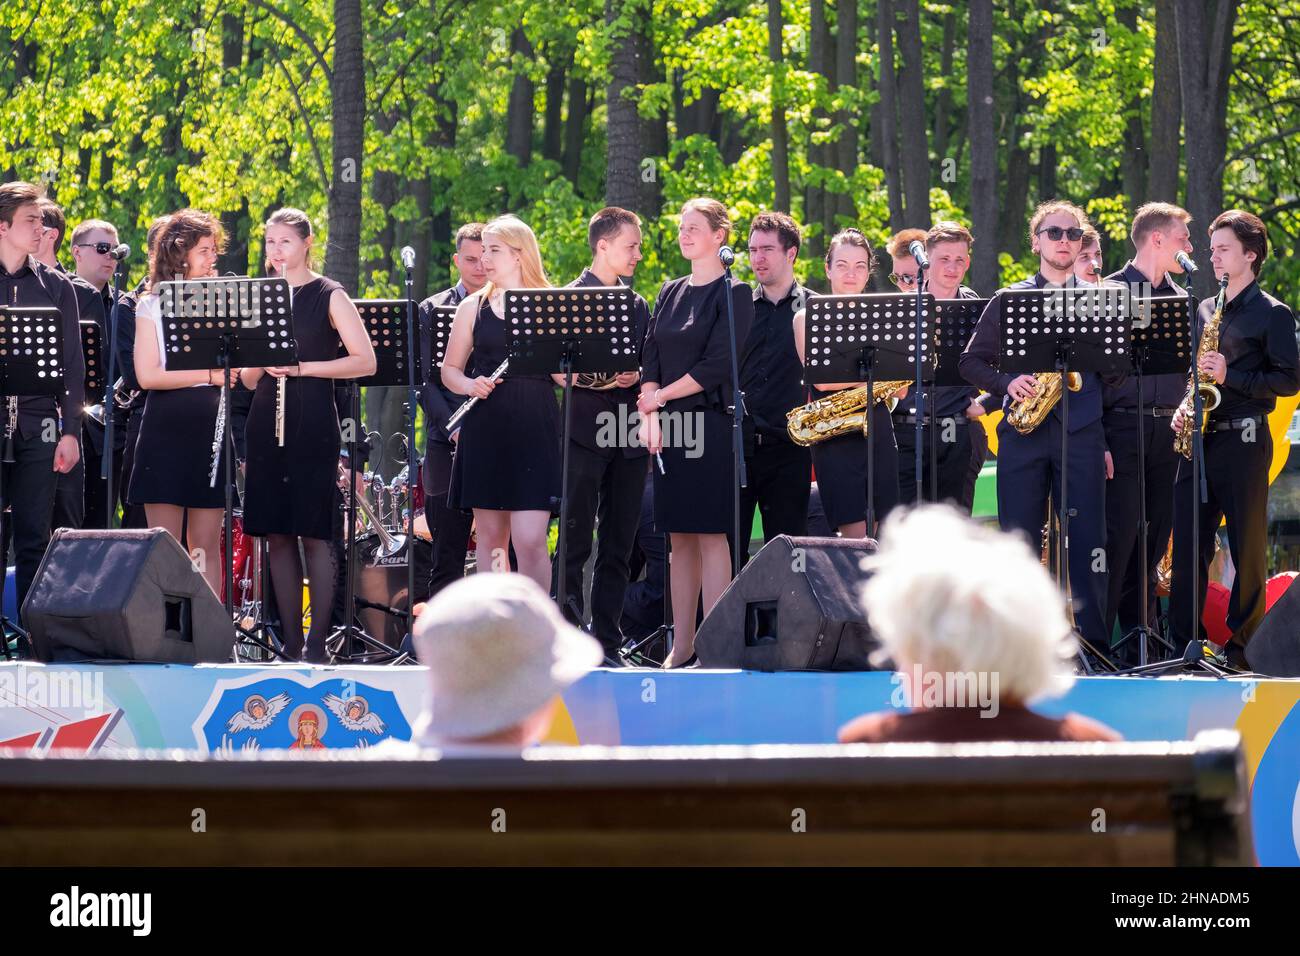 A brass band of young musicians is preparing for an outdoor performance. The audience is elderly women. Spring. Minsk (Belarus). May 9, 2018. Stock Photo